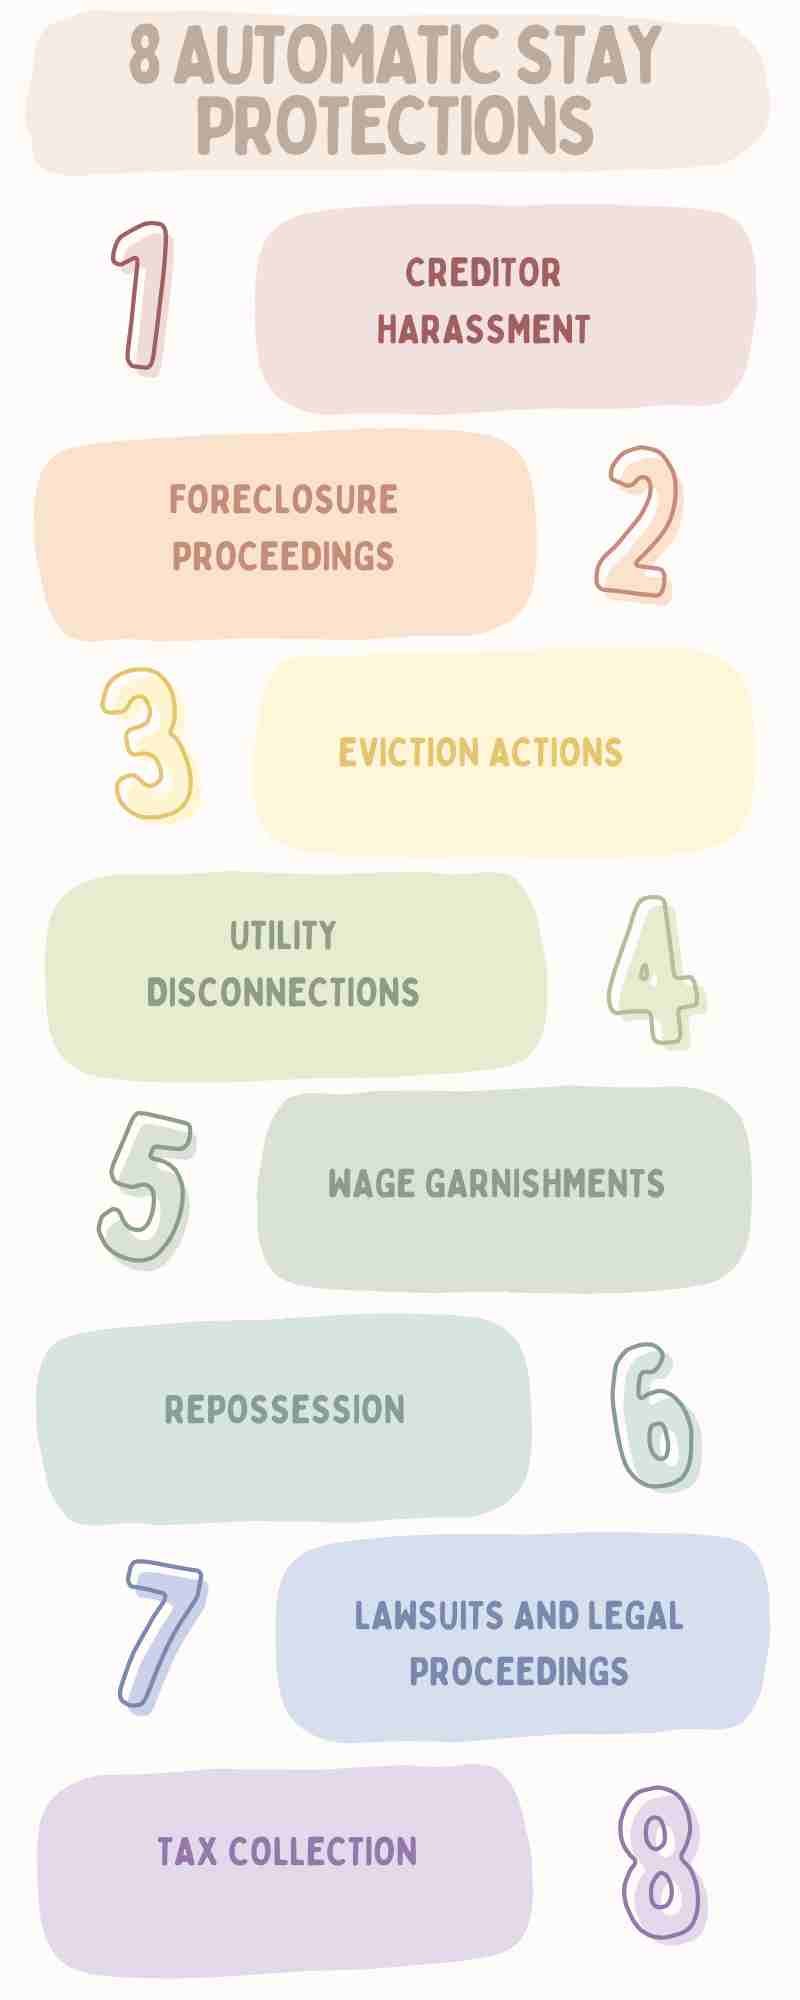 Infographic showing "8 Automatic Stay Protections in Chapter 7" including foreclosure, eviction actions, utility disconnections, wage garnishments, repossession, lawsuits and legal proceedings, and tax collection.